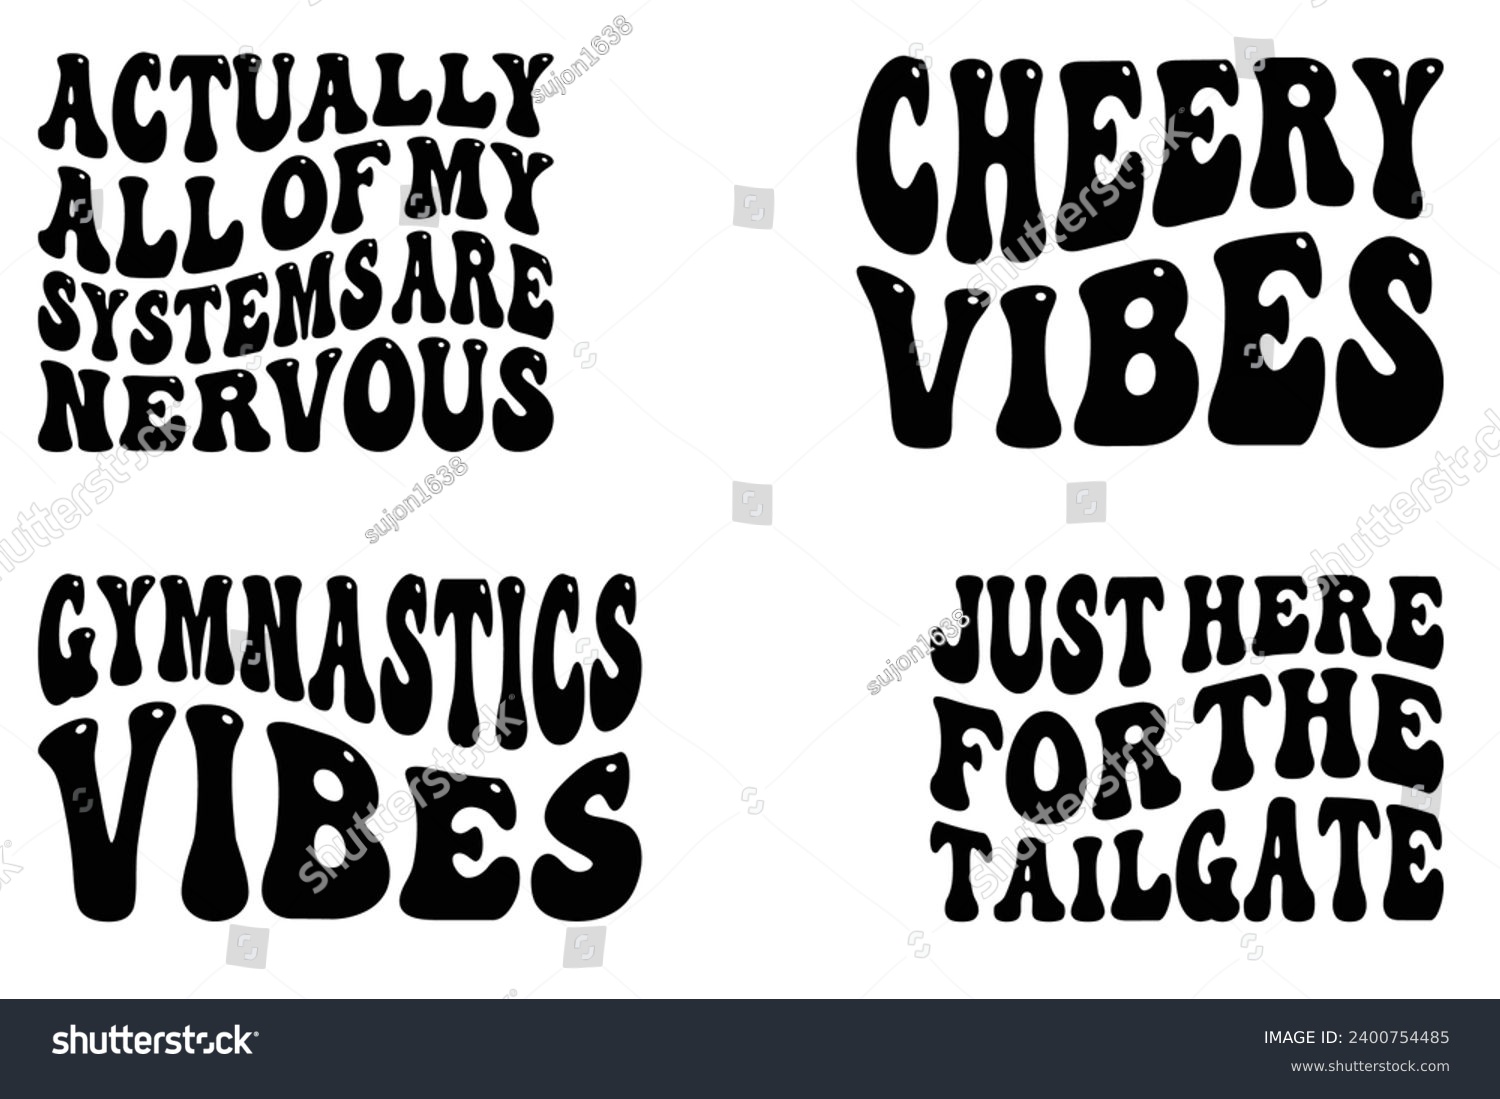 SVG of Actually All of My Systems Are Nervous, Cheery Vibes, Gymnastics Vibes, Just Here for the Tailgate retro wavy T-shirt designs svg